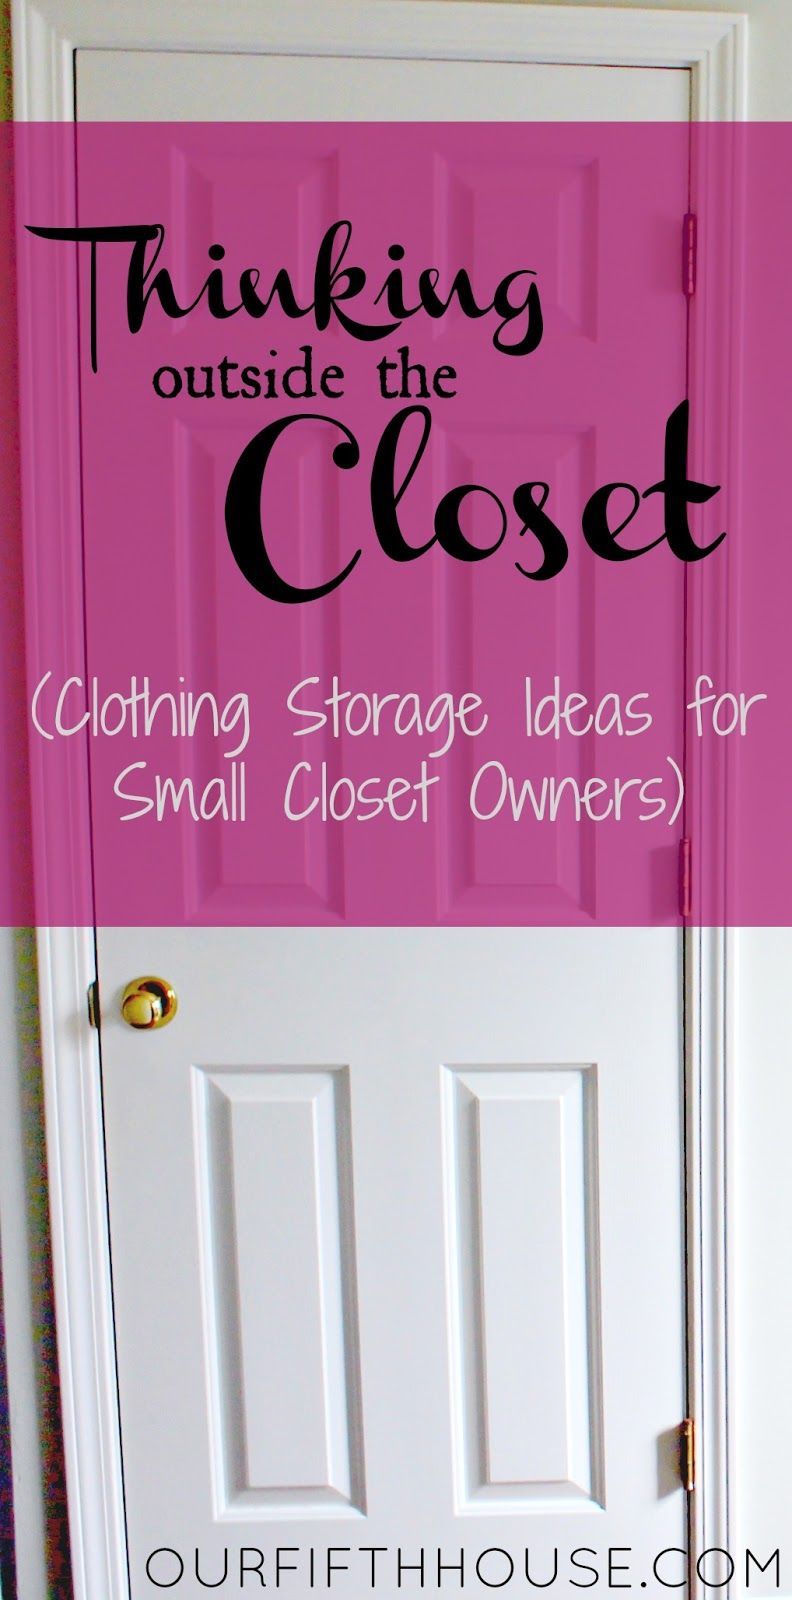 clothing storage ideas for small closets